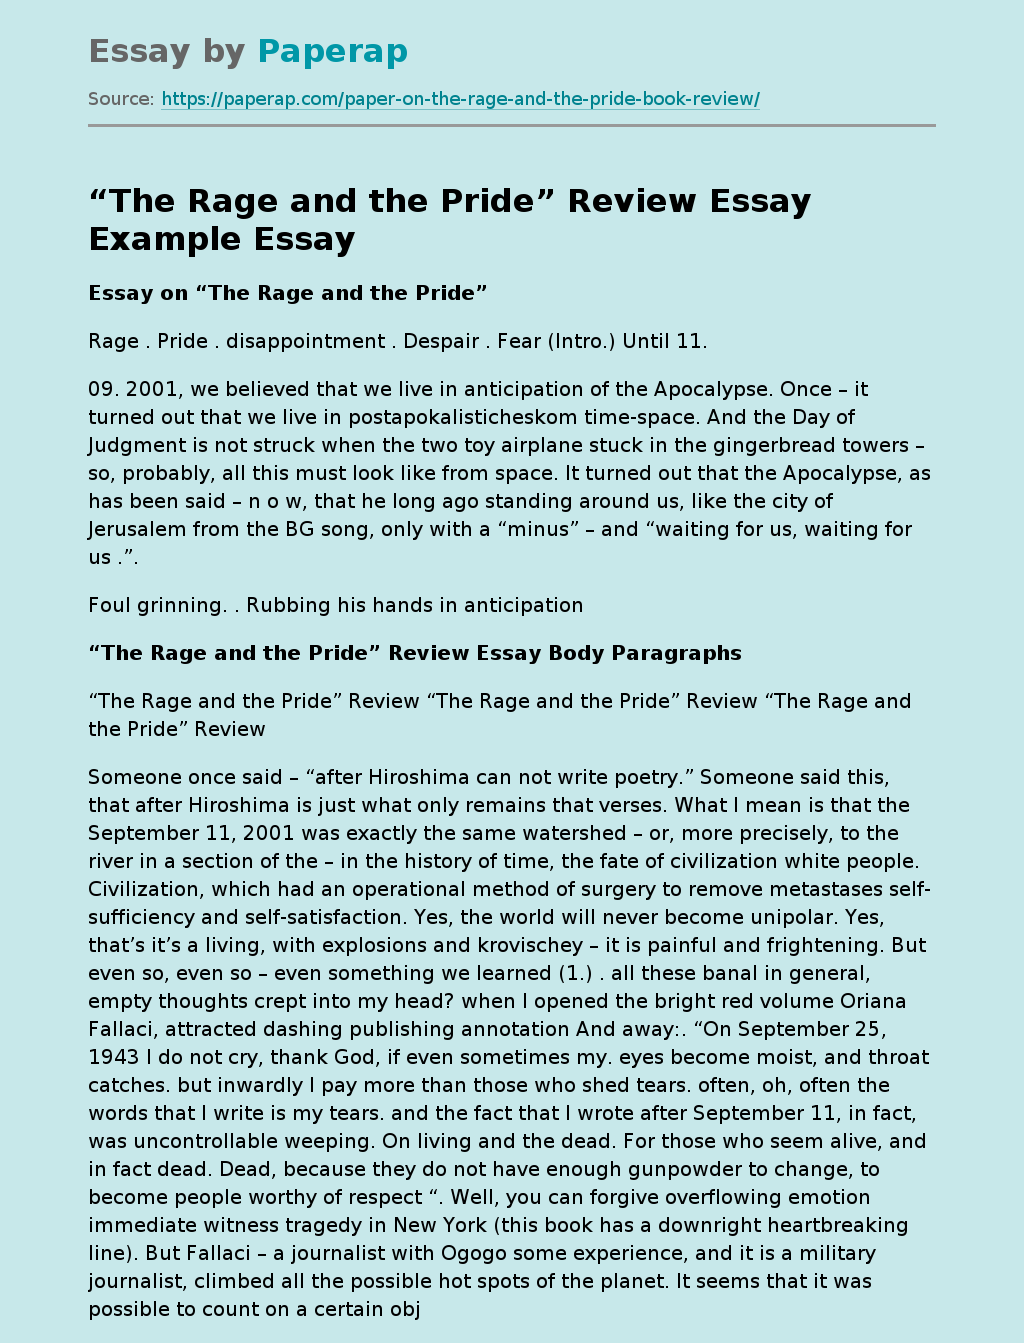 “The Rage and the Pride” Review Essay Example